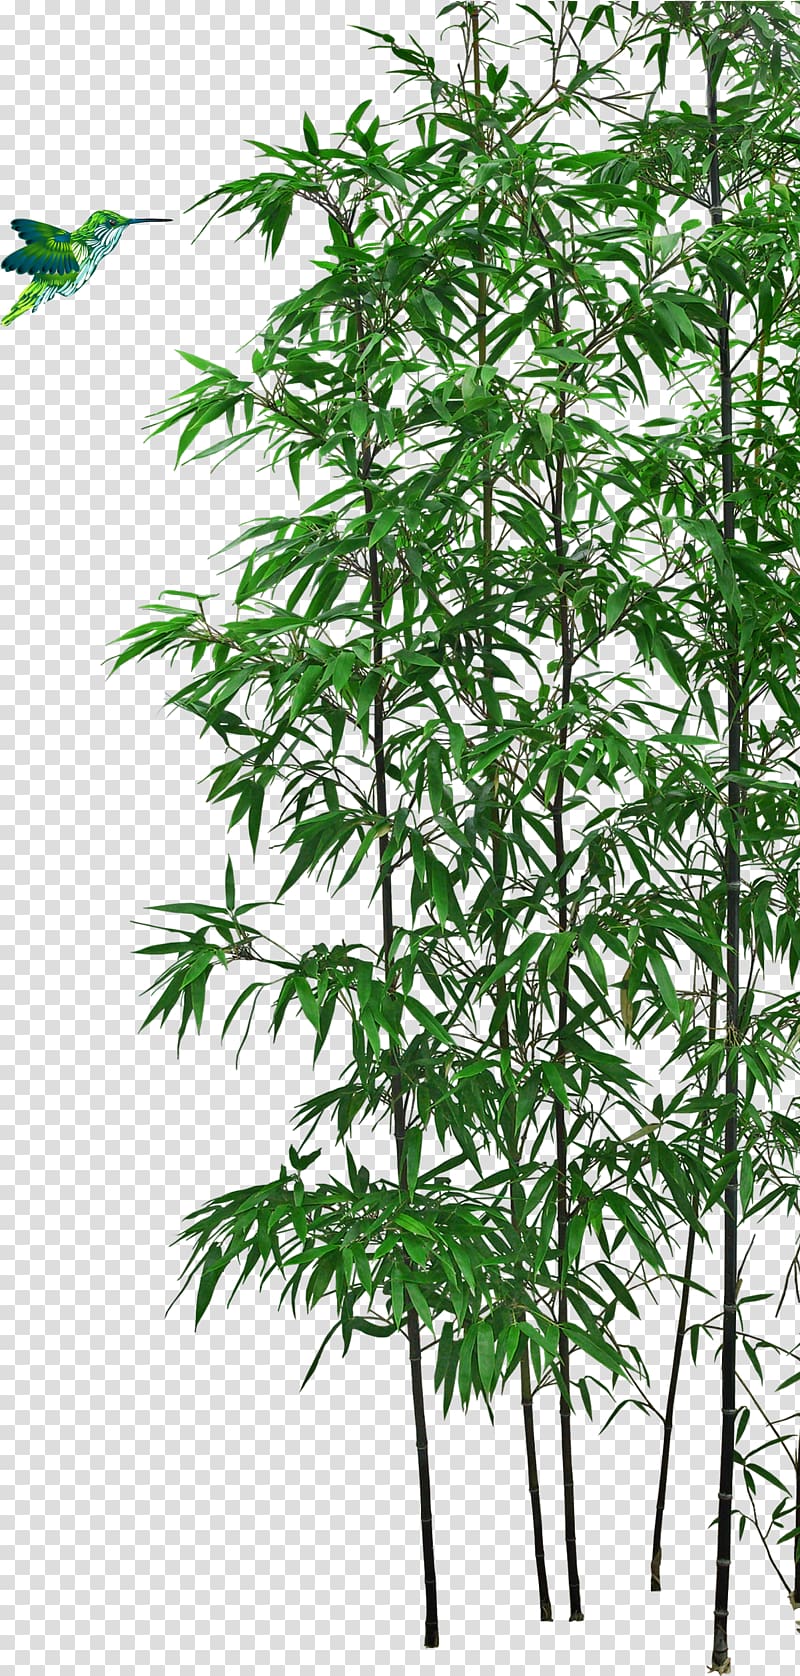 green leafed plant and bird, Bamboo Bonsai Tree, bamboo transparent background PNG clipart